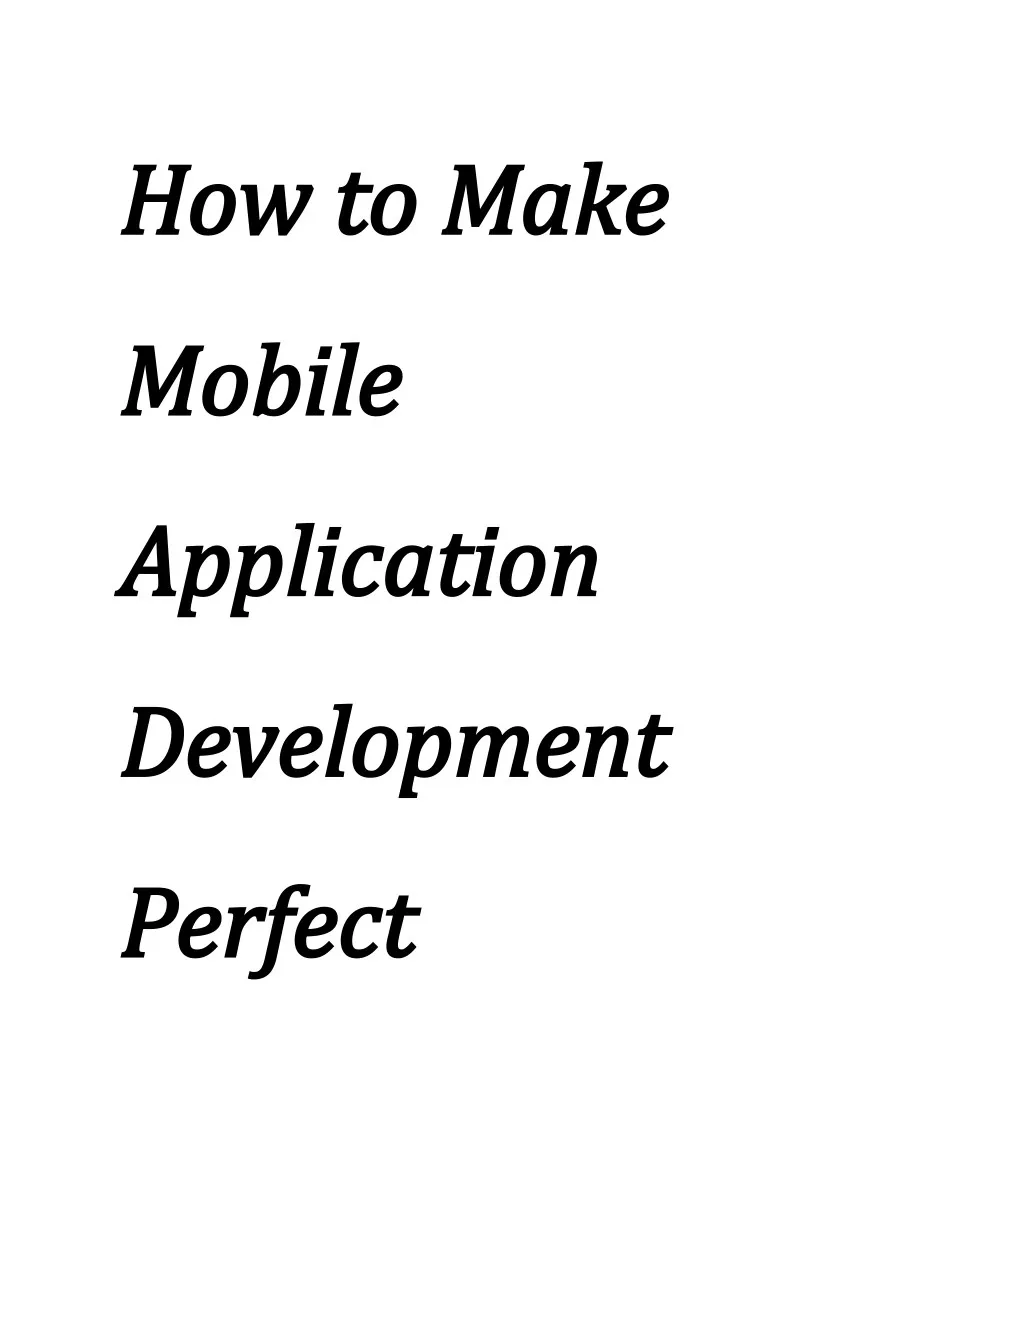 how how to to make mobile mobile